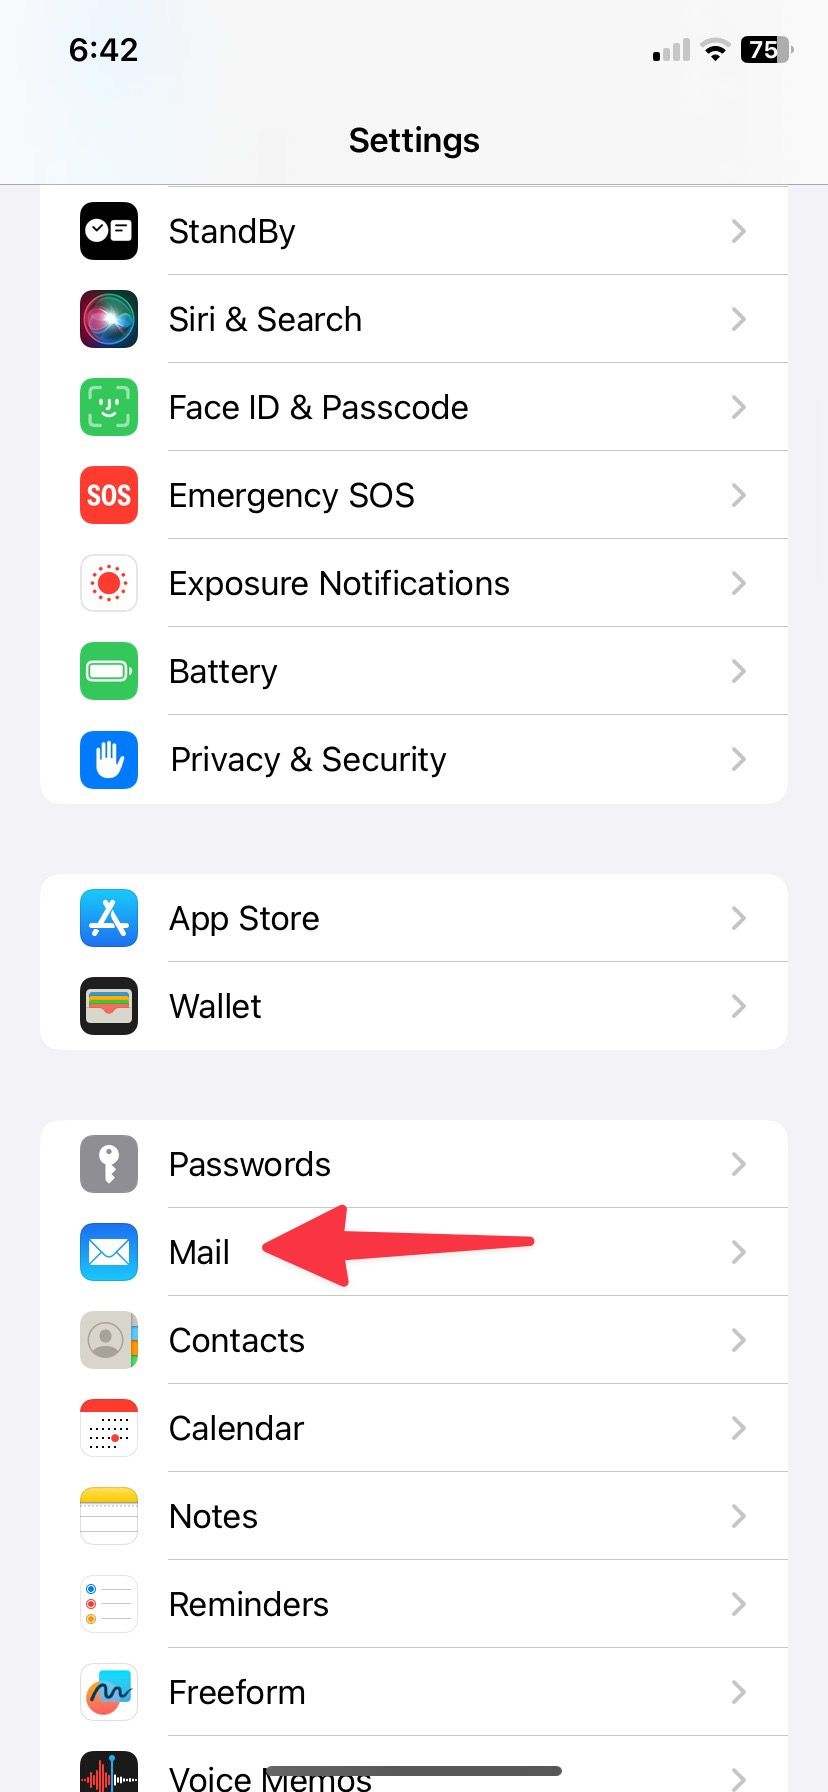 Open Mail on your iPhone